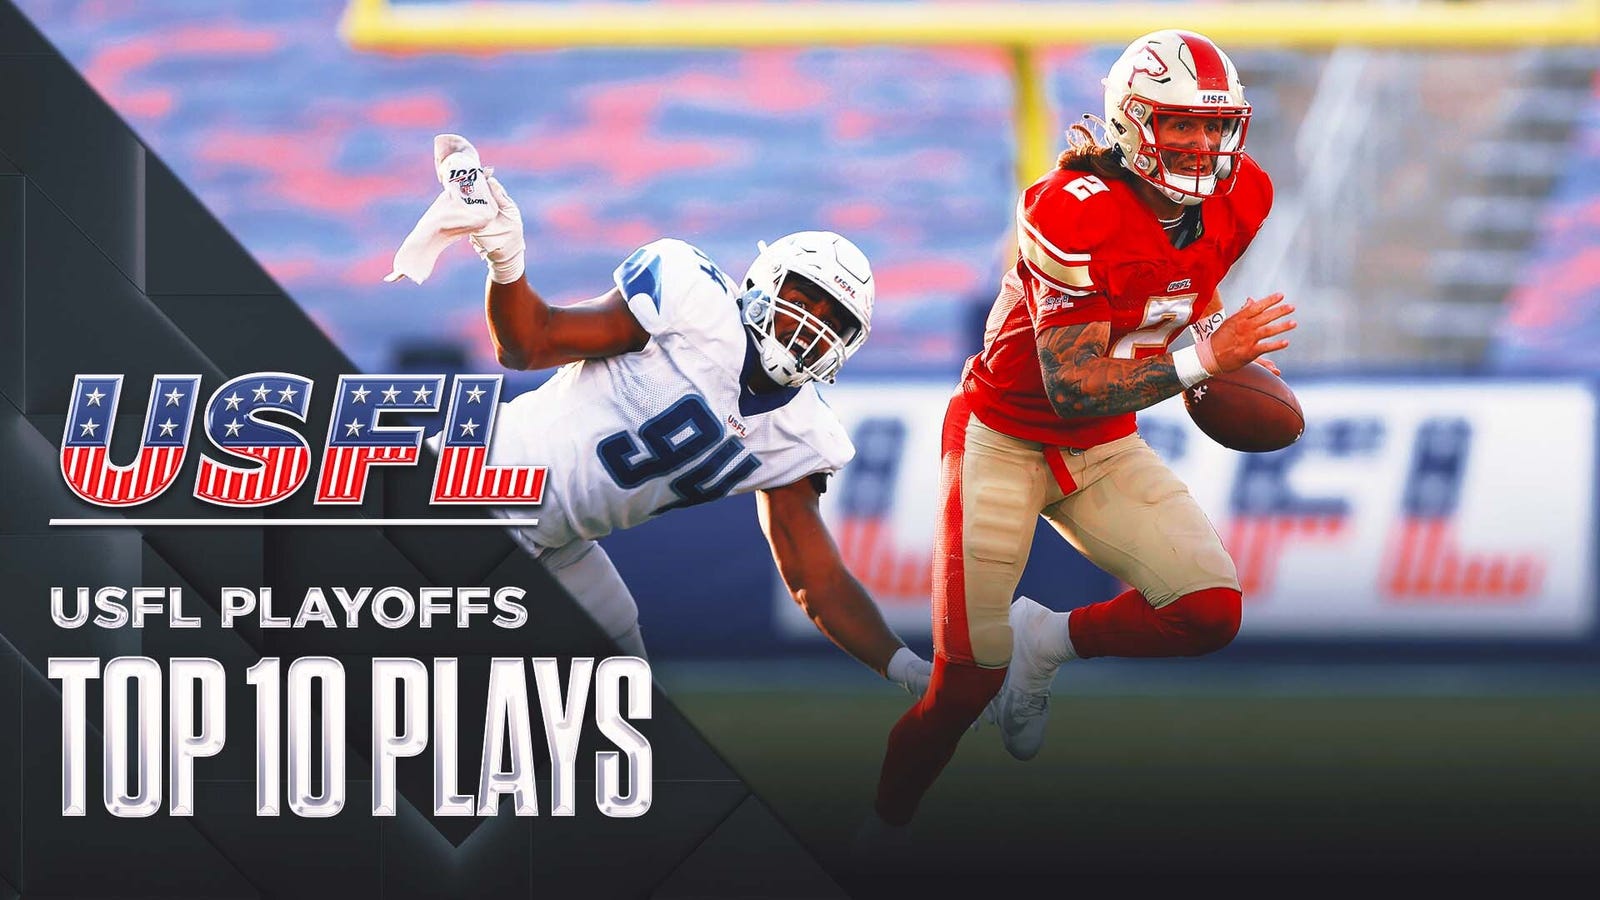 USFL Top 10 plays from the semifinals